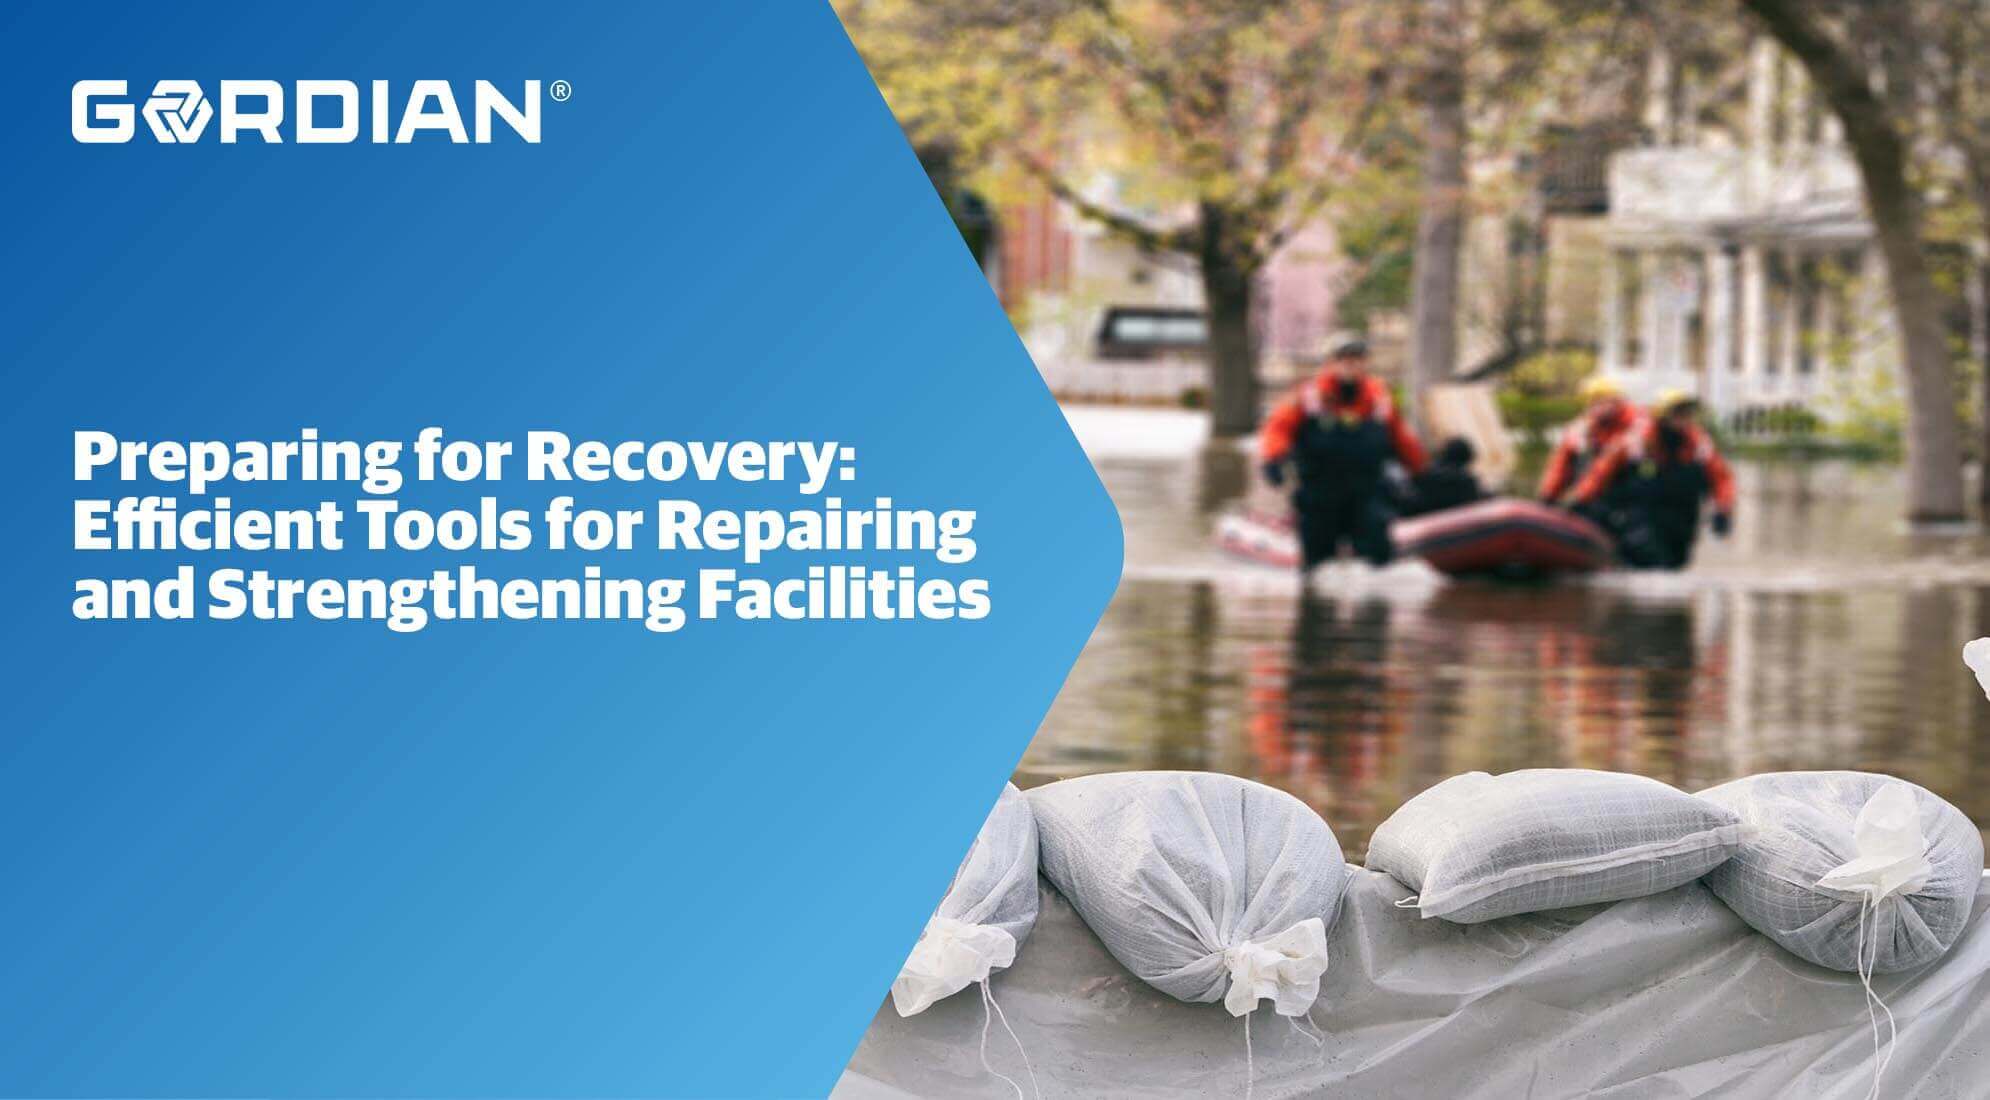 Preparing for Recovery: Efficient Tools for Repairing and Strengthening Facilities 4